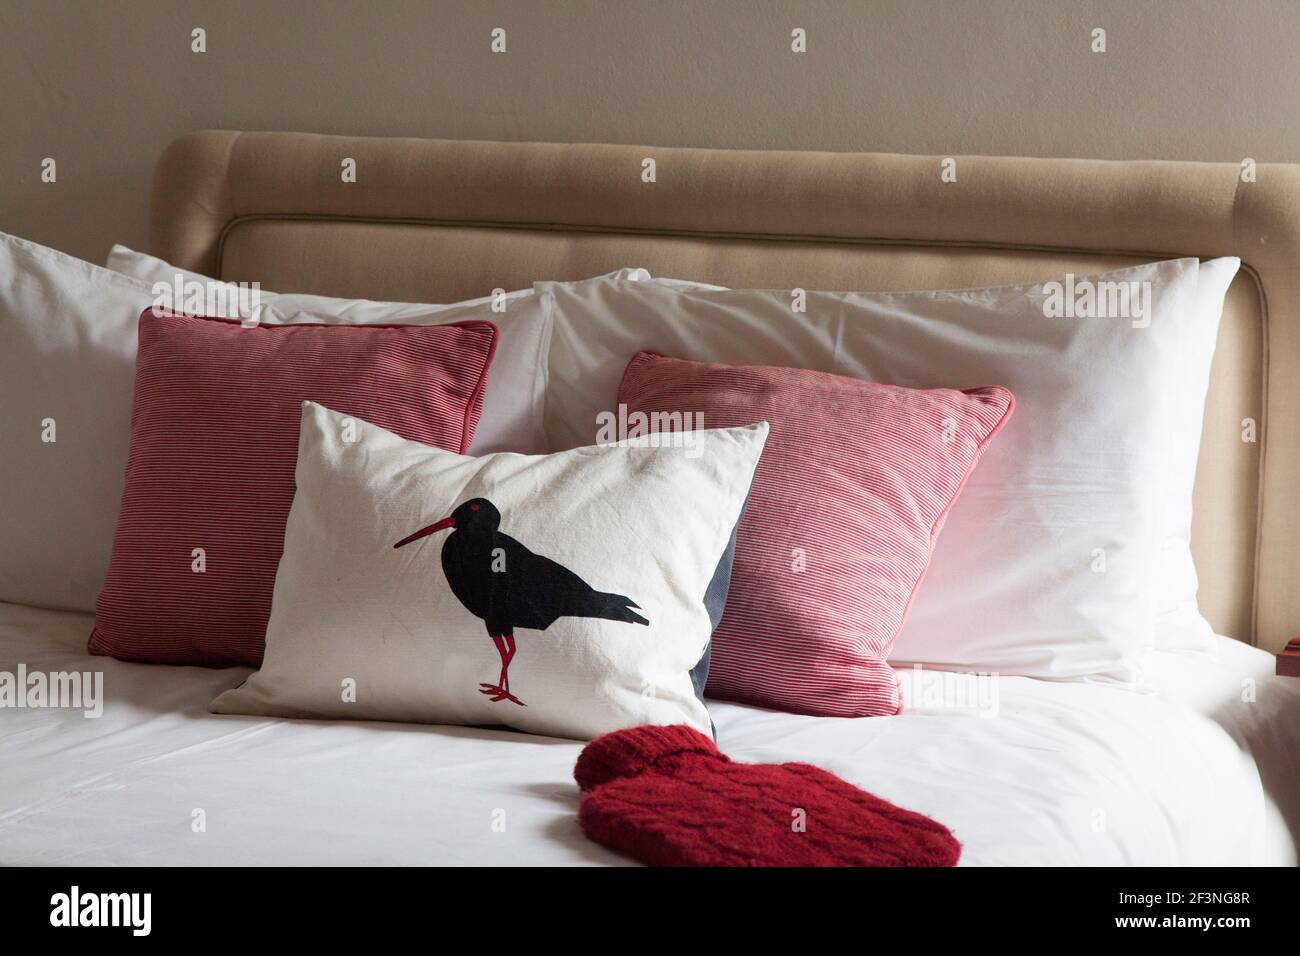 Bed with neutral colour headboard, red striped cushions, white bed linen, red hot water bottle and cushion with printed picture of an Oystercatcher Bi Stock Photo